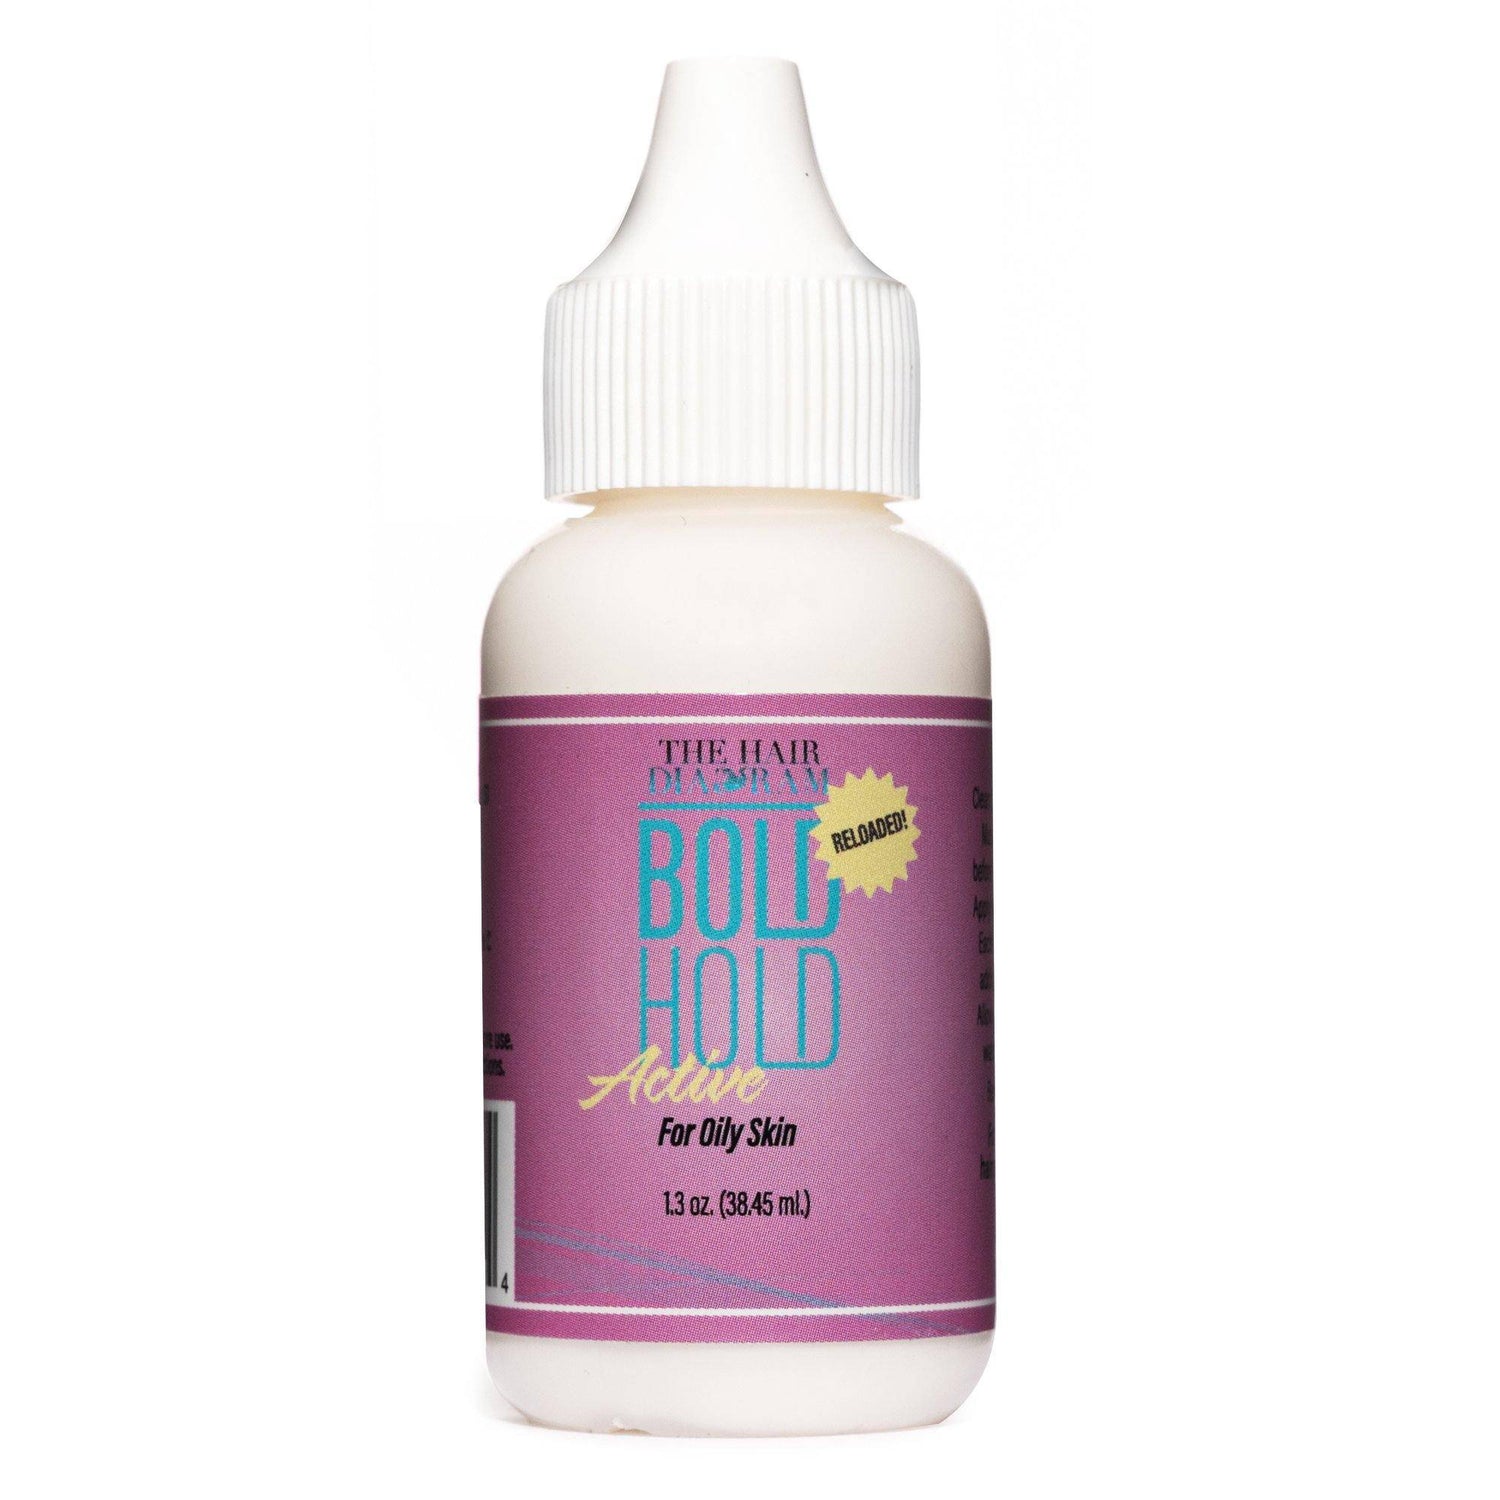 BOLD HOLD ACTIVE 1.3 OZ - VIP Extensions